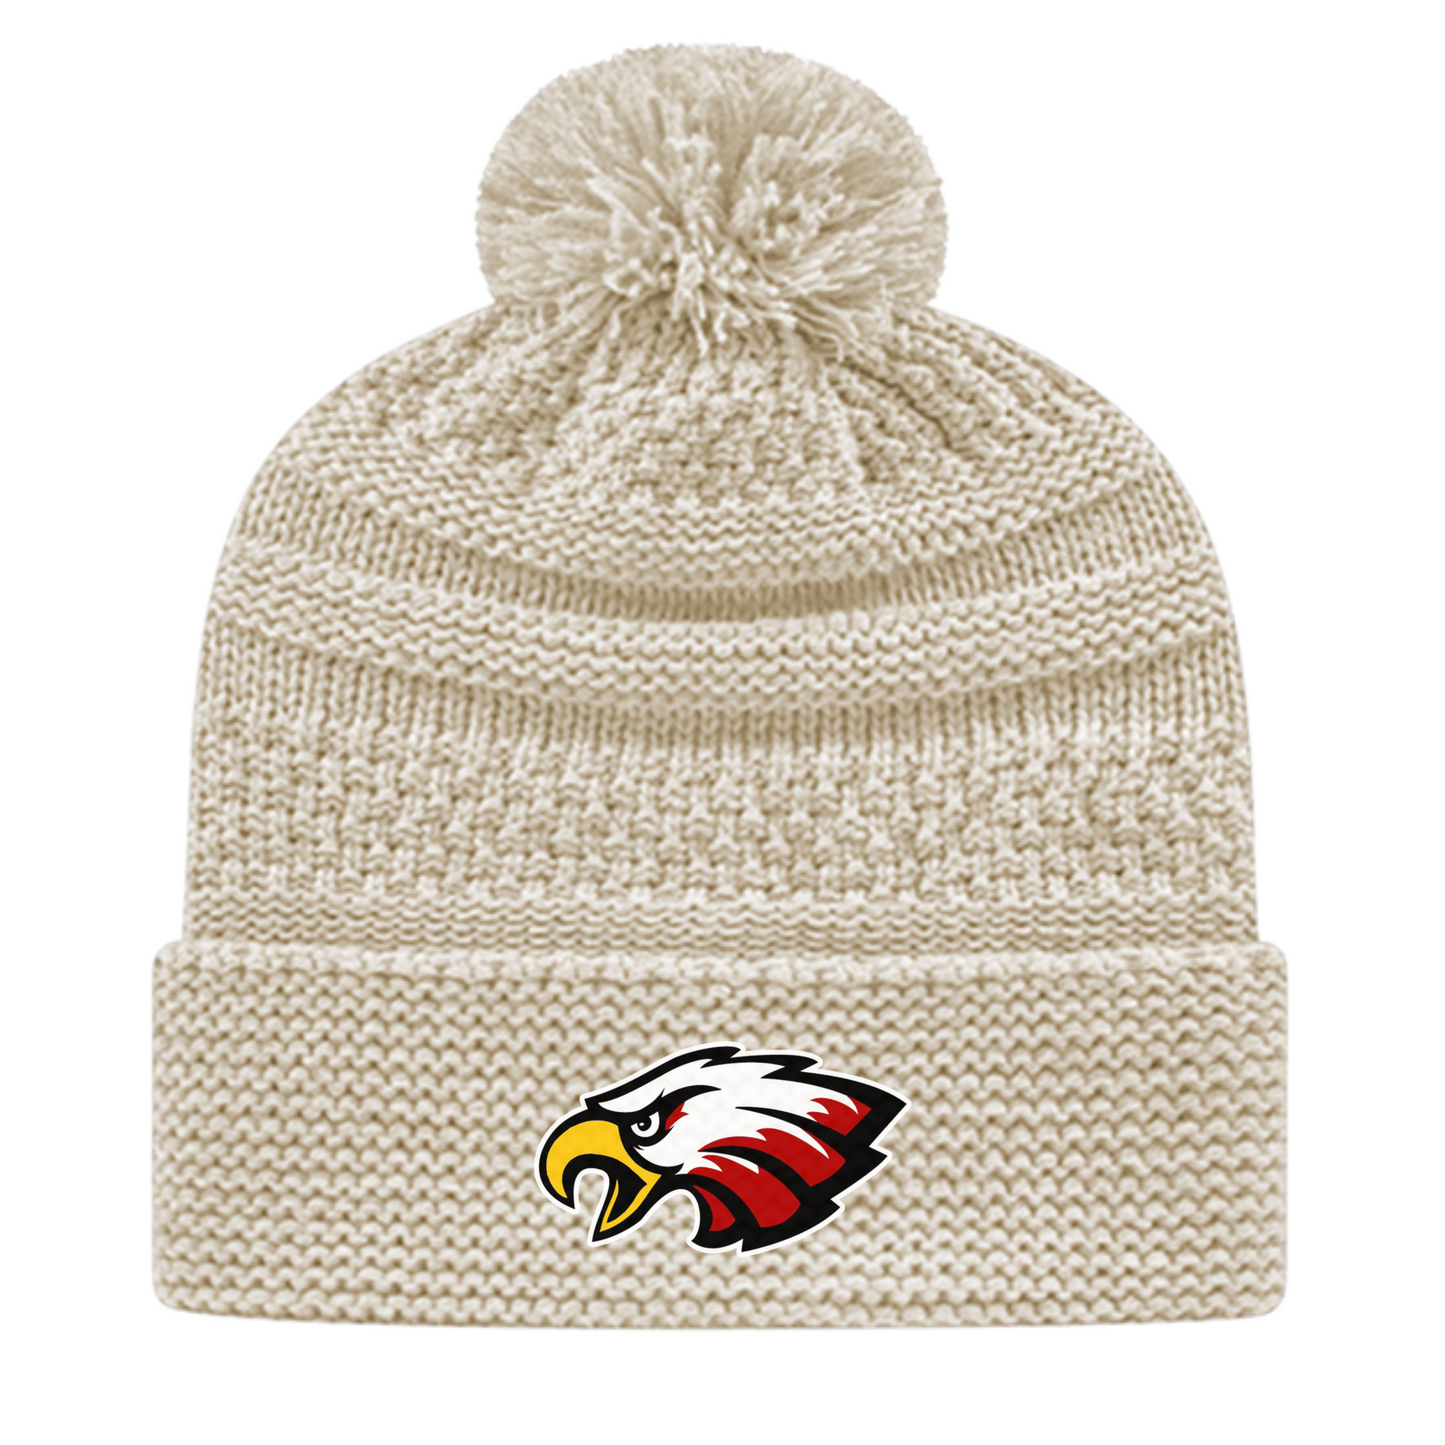 Southern Boone Basketball Cable Knit Cap with Cuff - IK55